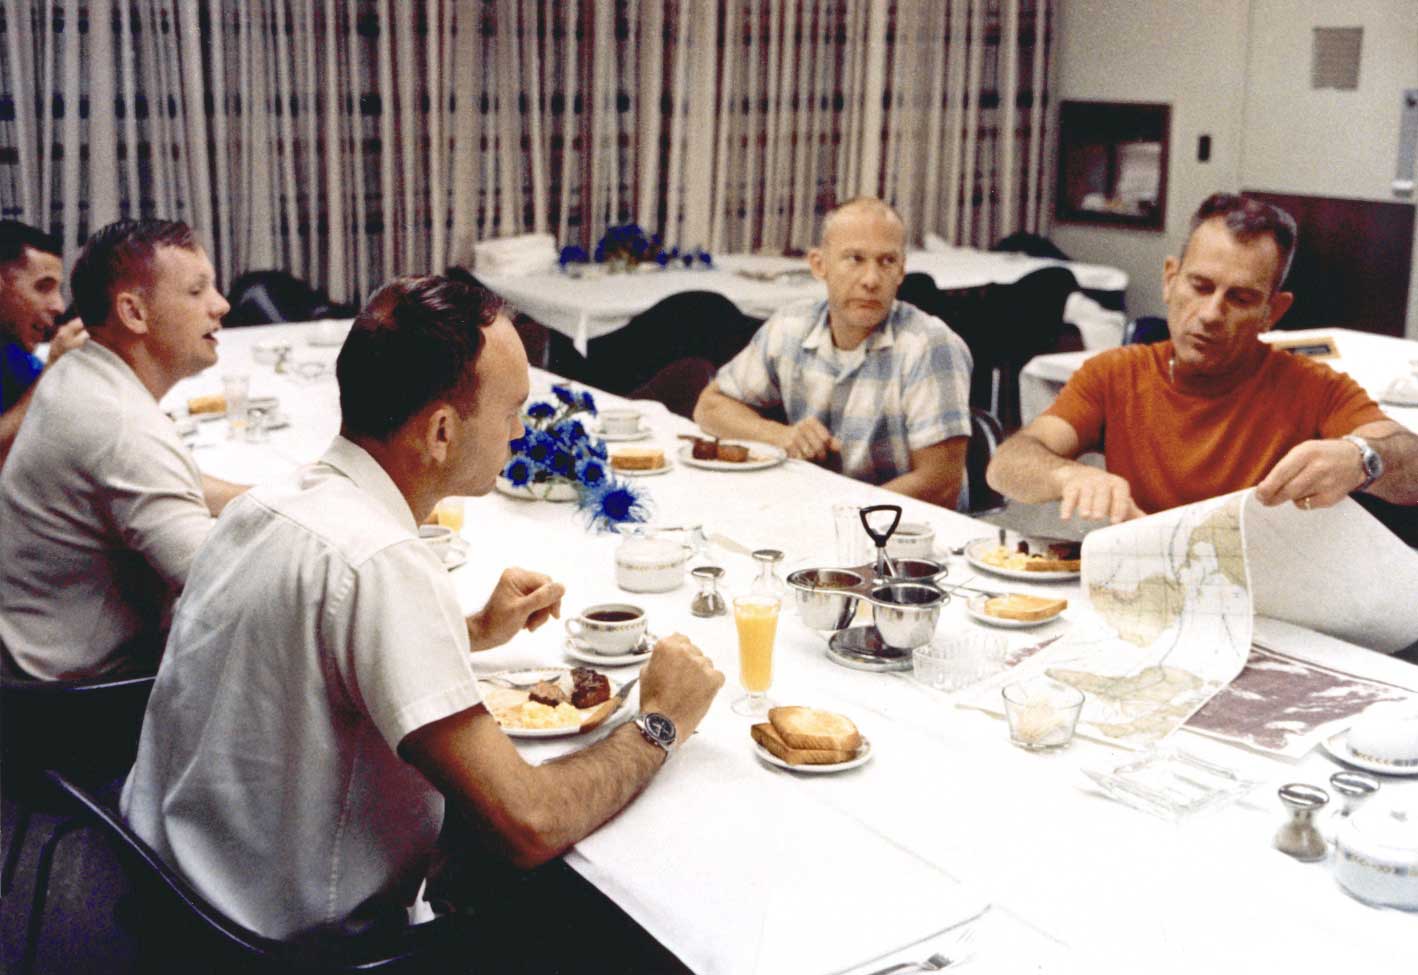 In case one of the astronauts fell sick there were designated back-ups who would carry out the mission in their place if necessary. Neil Armstrong, Michael Collins, Deke Slayton, and Buzz are sen here at the prelaunch breakfast along with back-up crew-member Bill Anders.